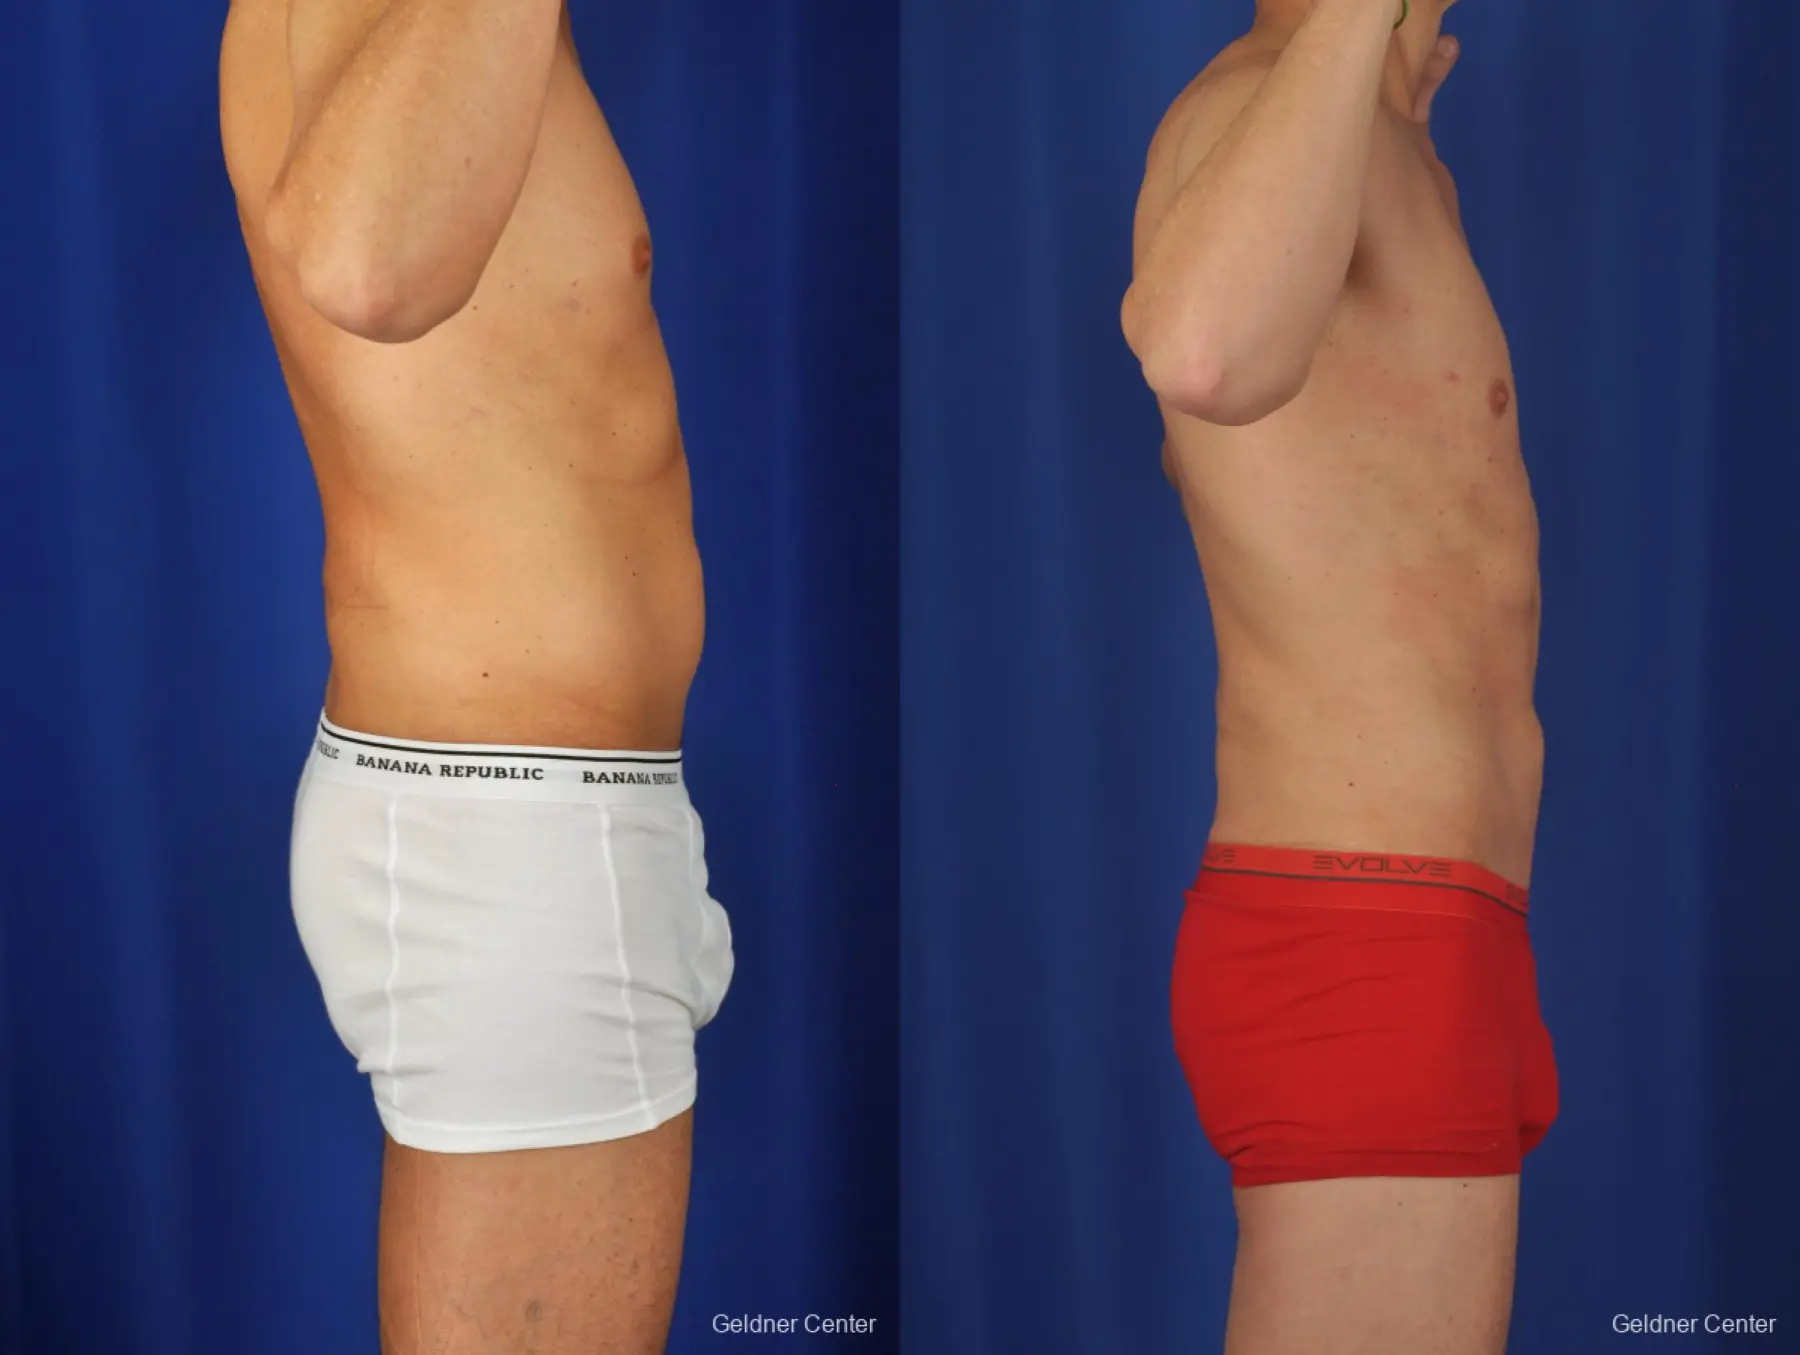 Liposuction For Men: Patient 2 - Before and After 3